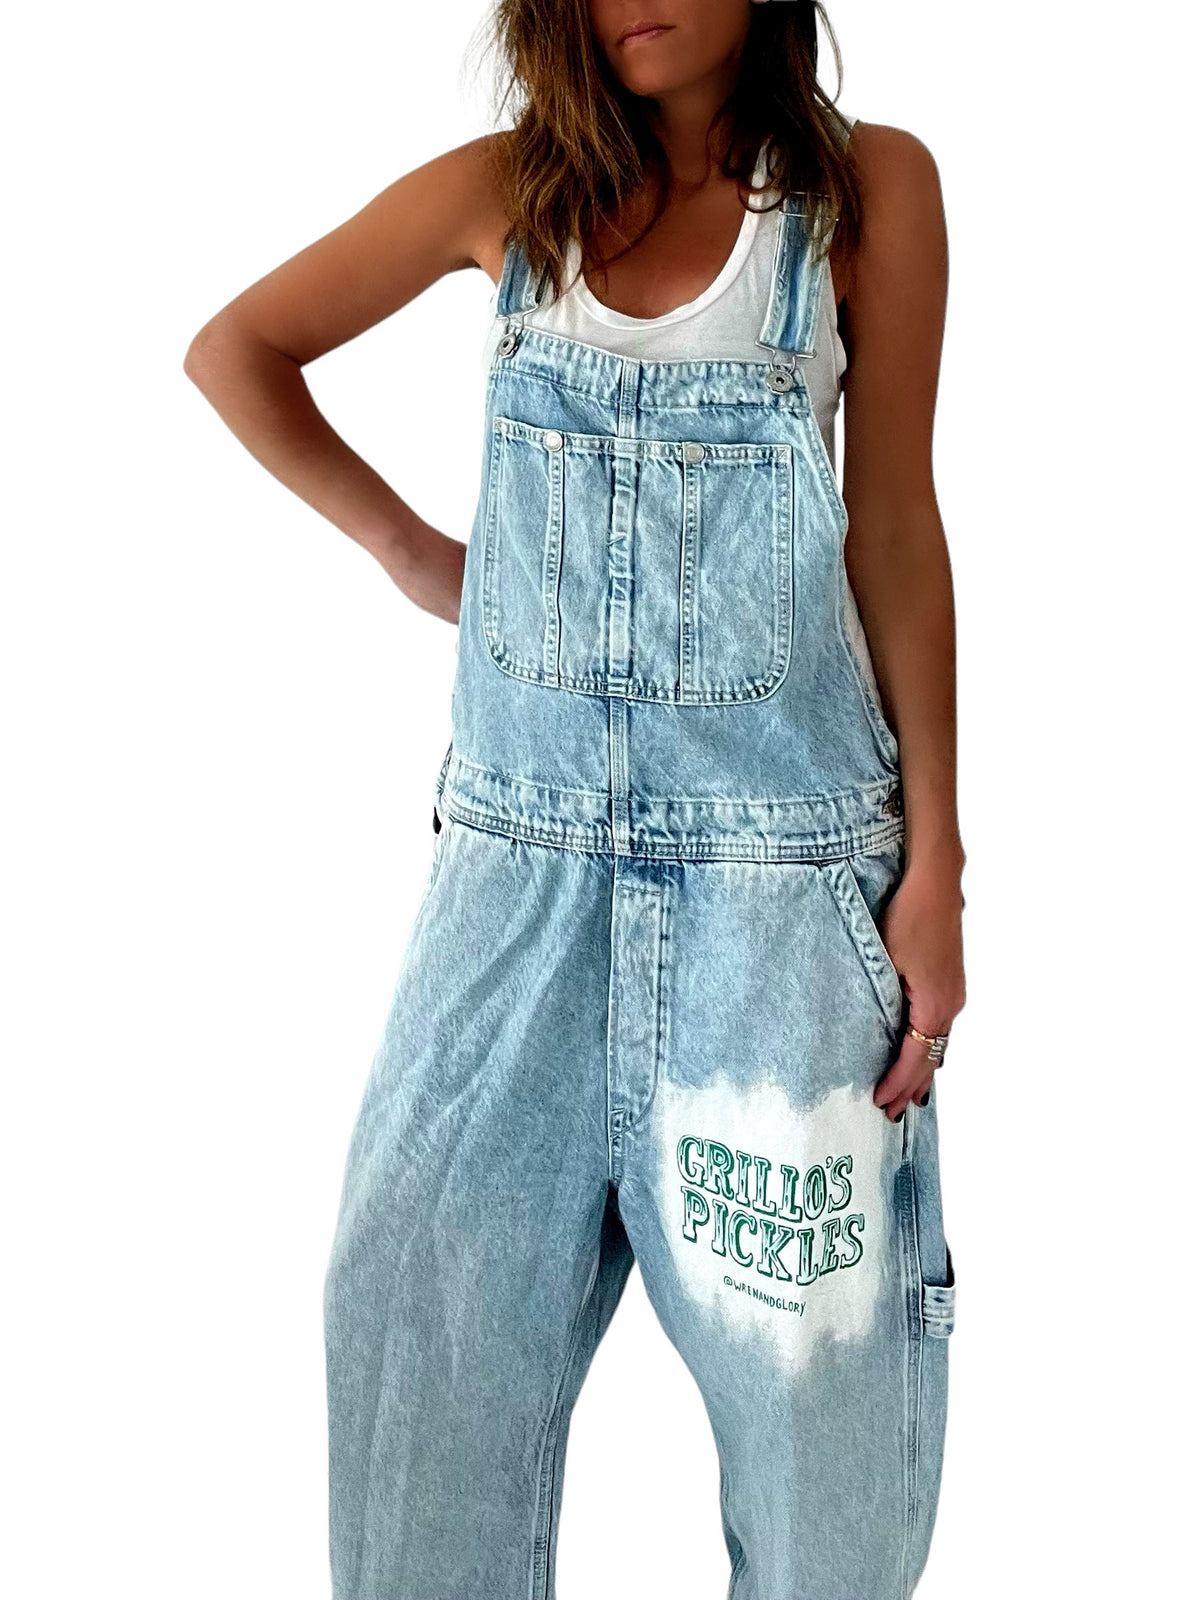 Grillo's x W+G 'Will Work' Painted Overalls